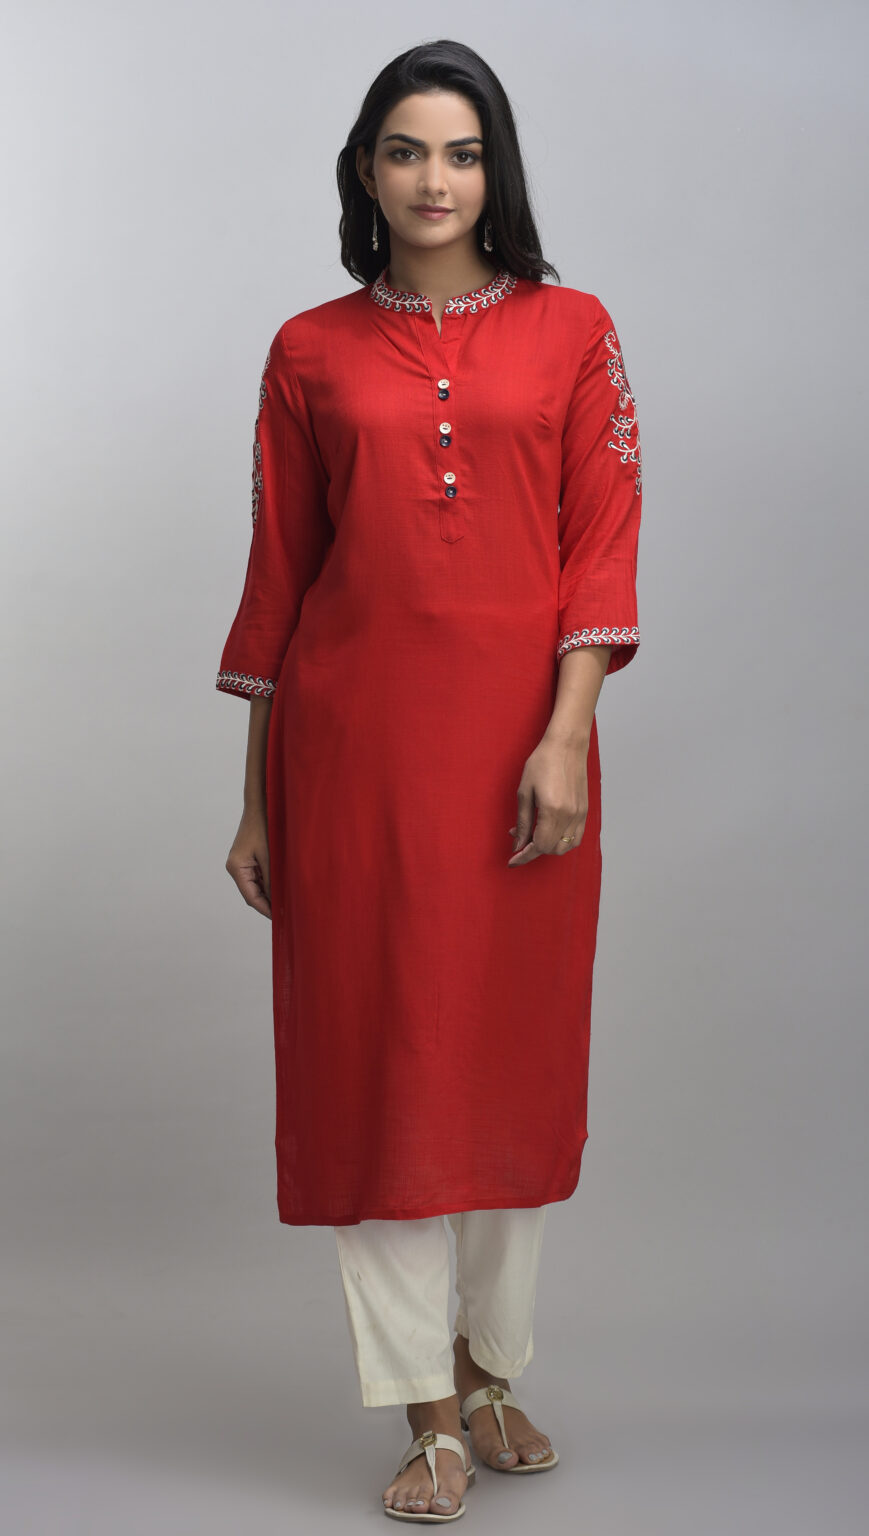 Which city is famous for kurti manufacture and wholesale? - Quora